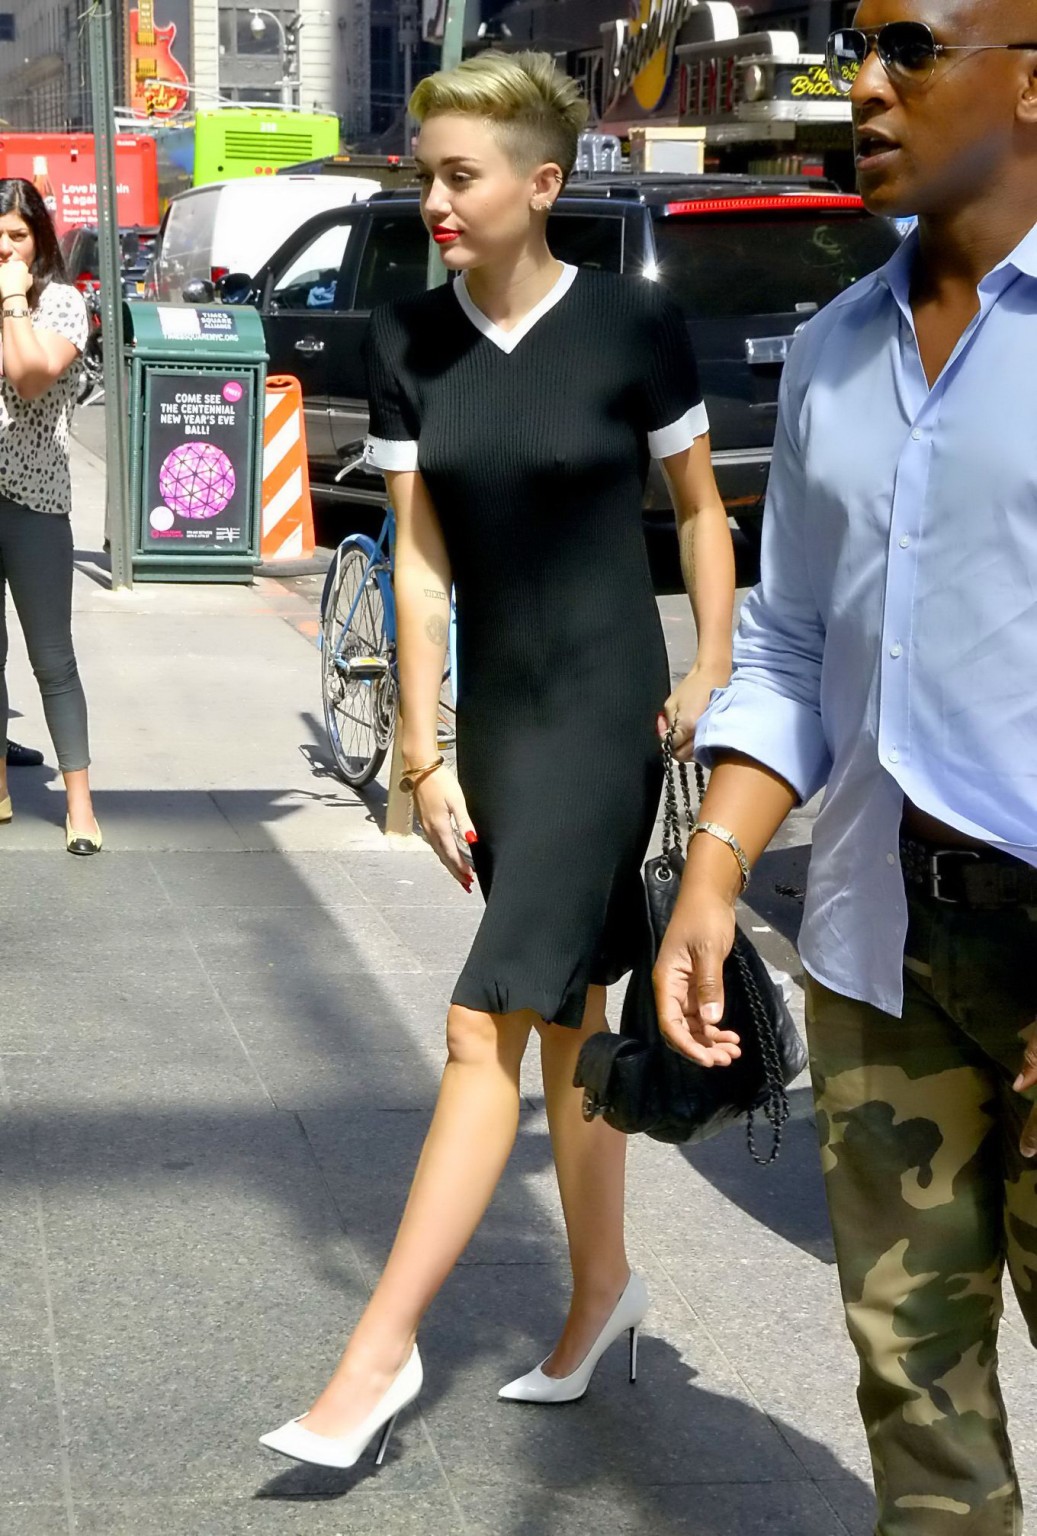 Miley Cyrus Flashing Her Boobs Braless In Black Transparent Dress Out In NYC